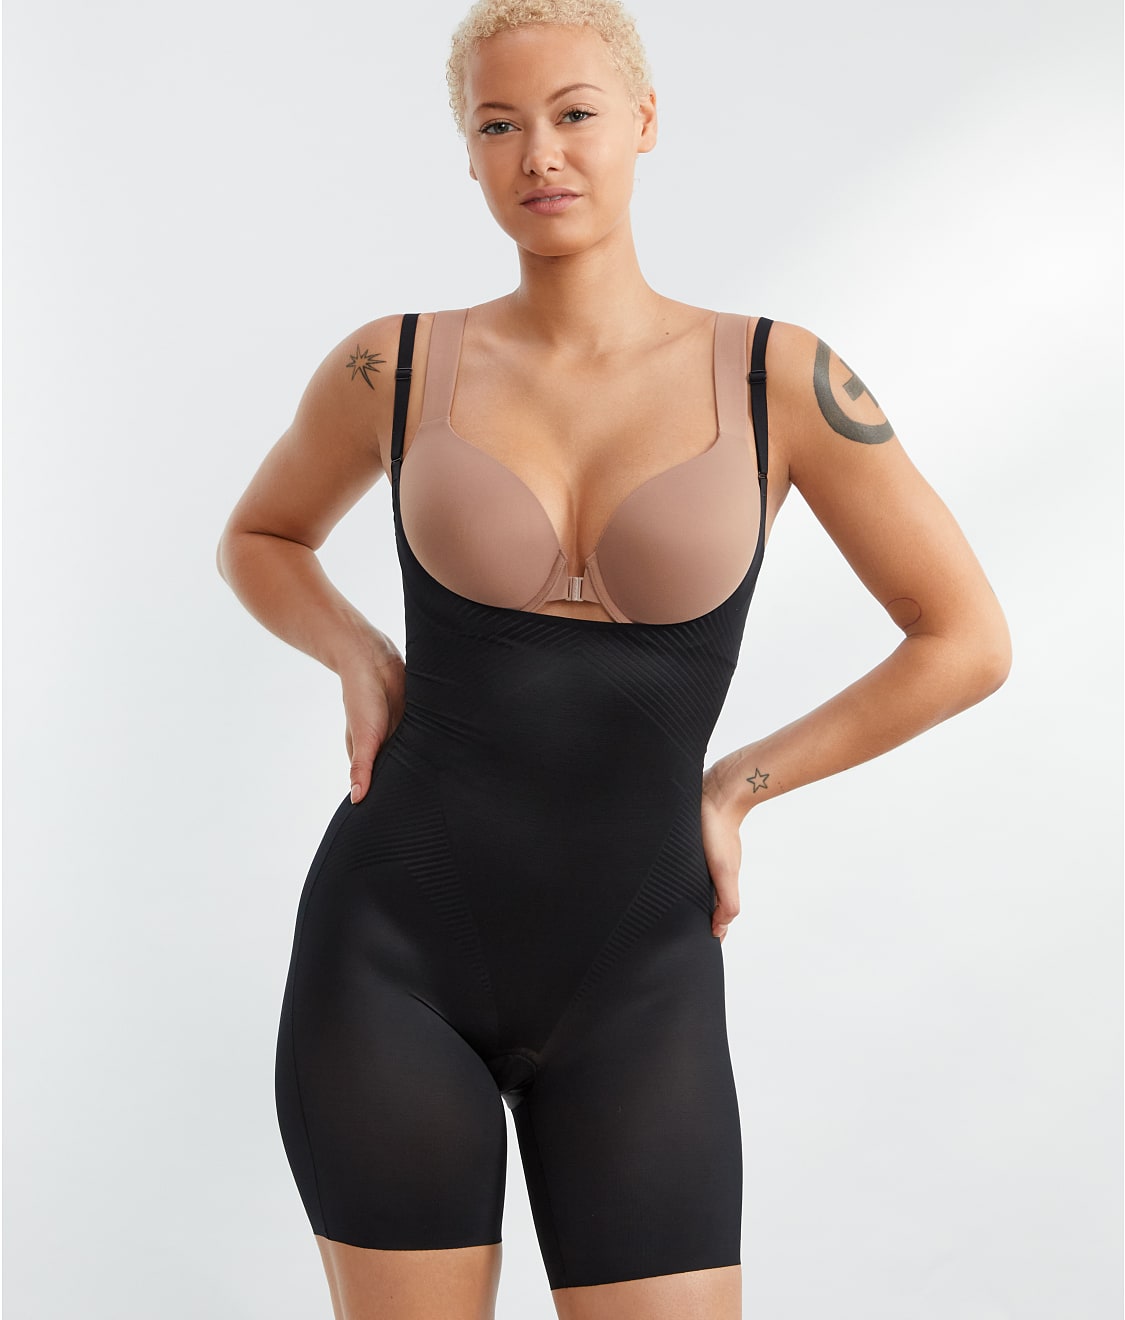 Spanx Slimplicity Open Bust Bodysuit Black Small NWT